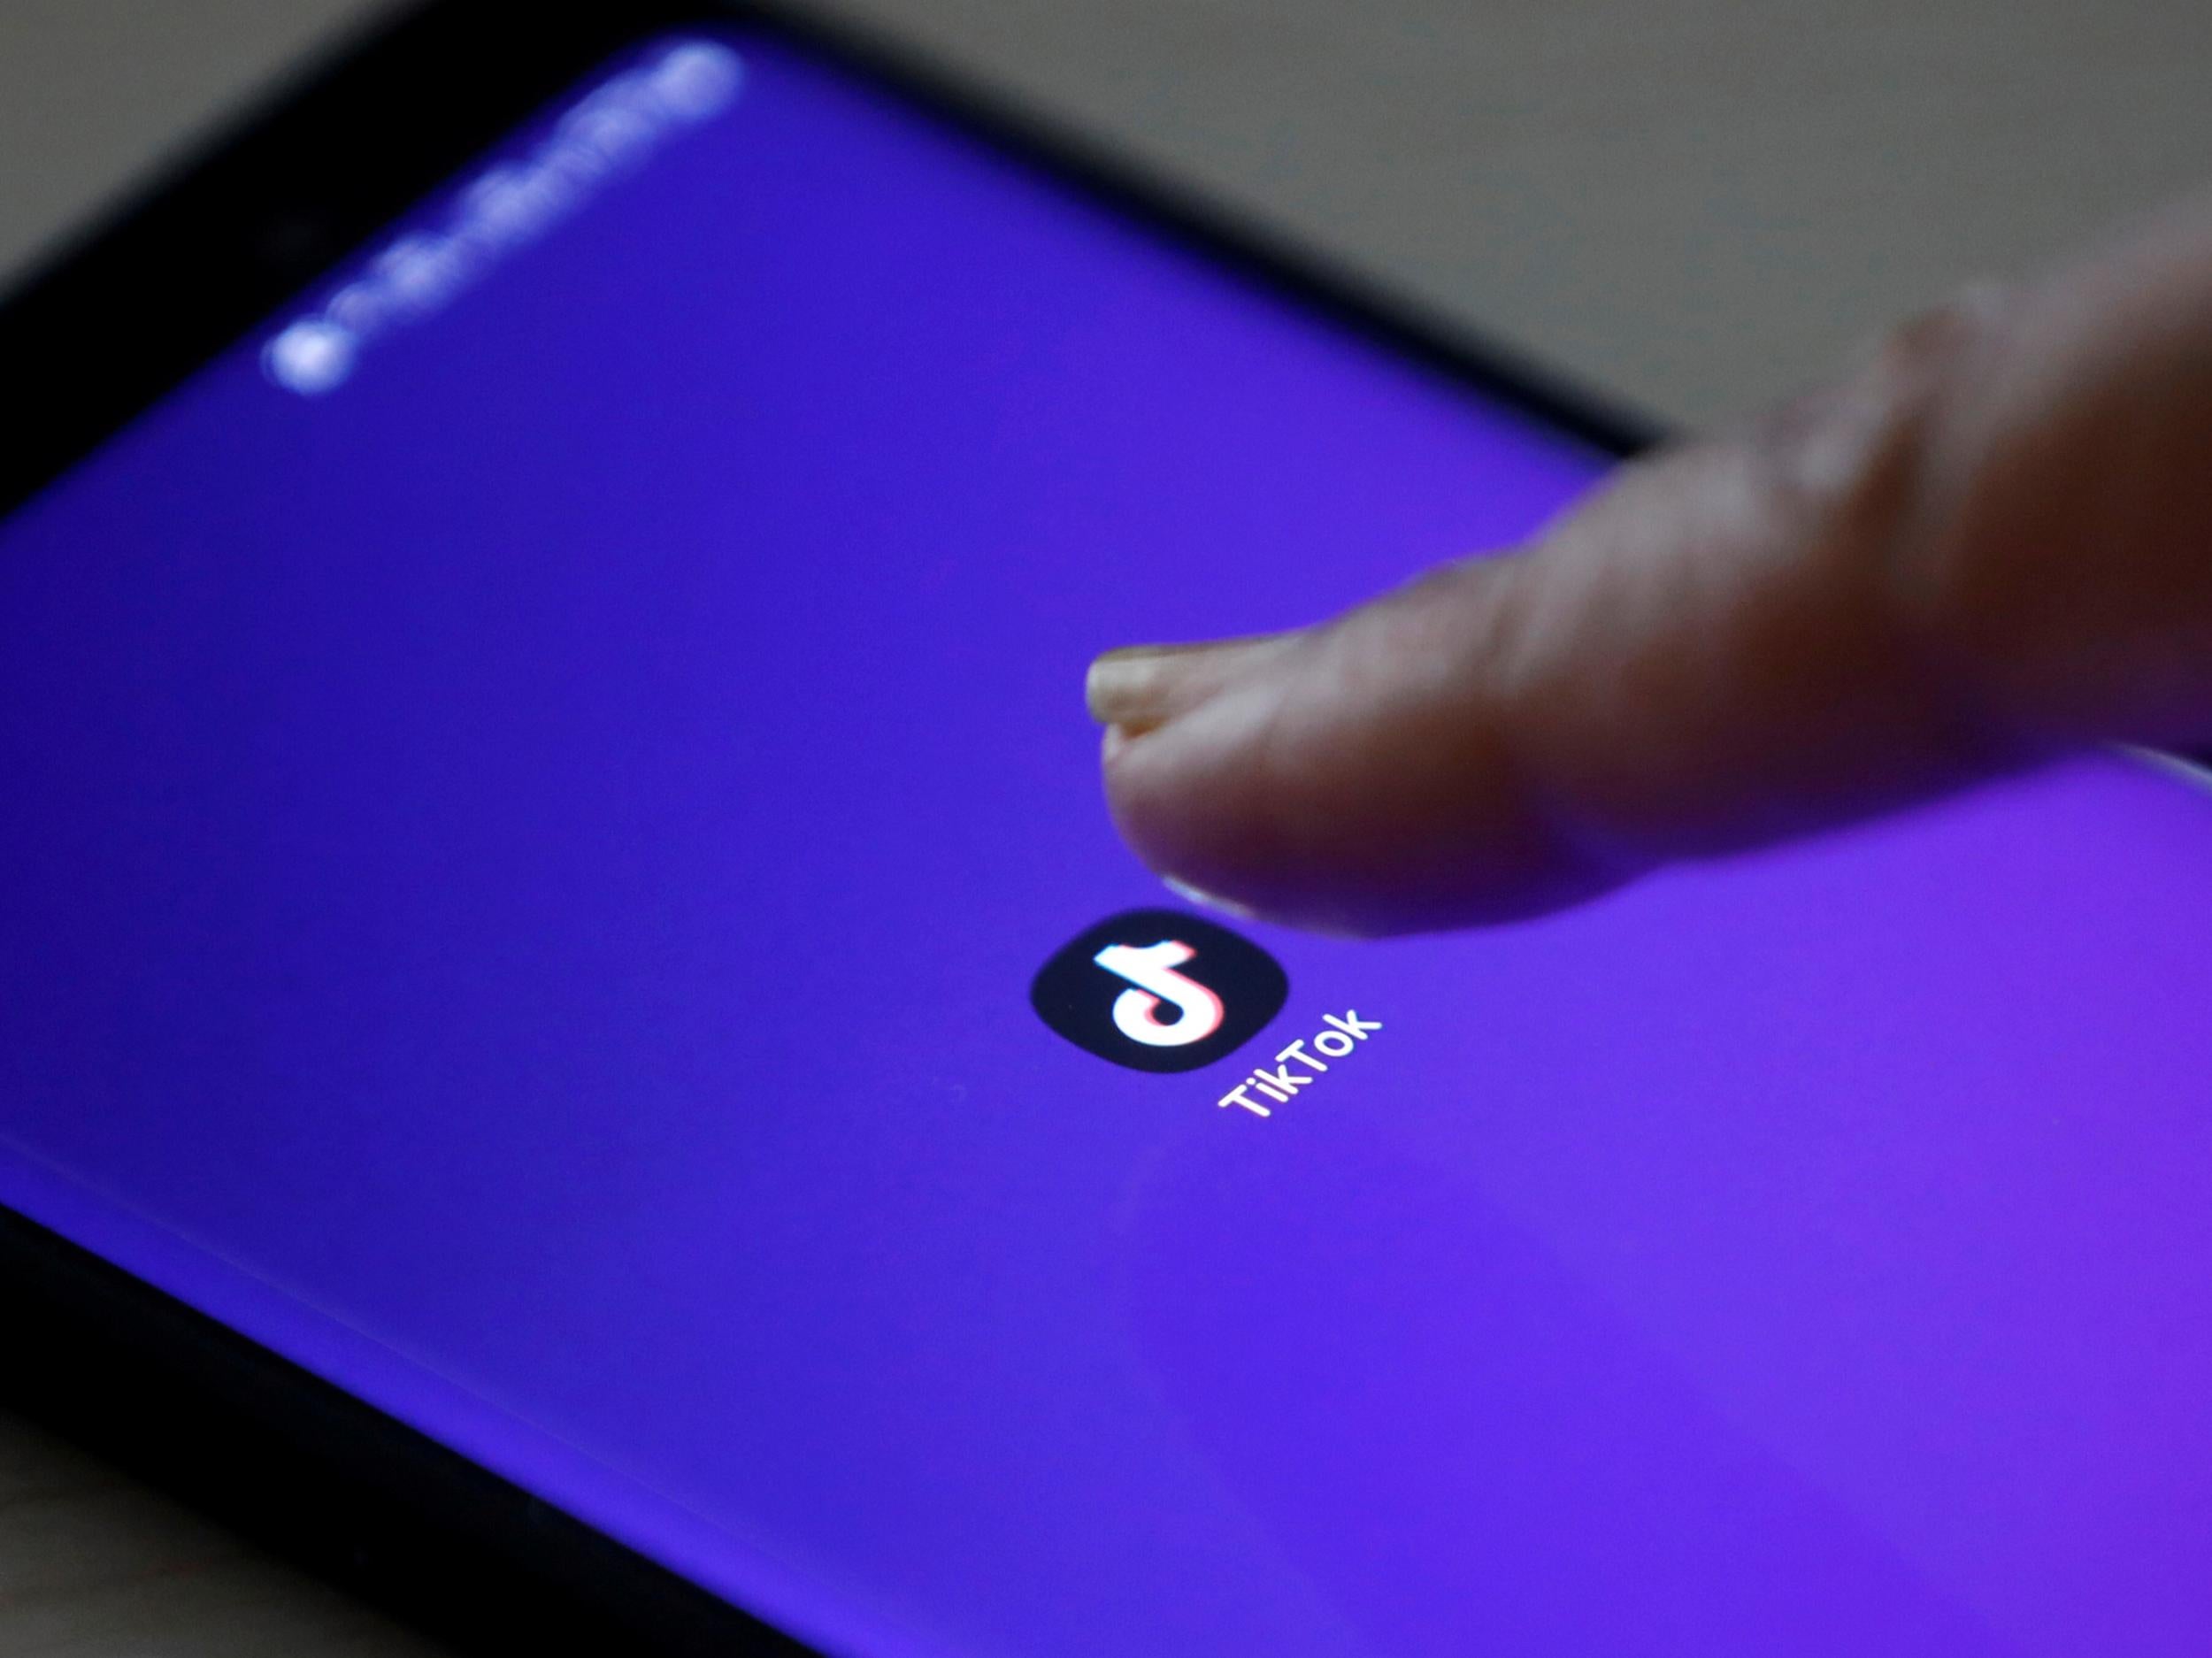 A security weakness in the popular video-sharing app TikTok appears to let hackers hijack a user's feed